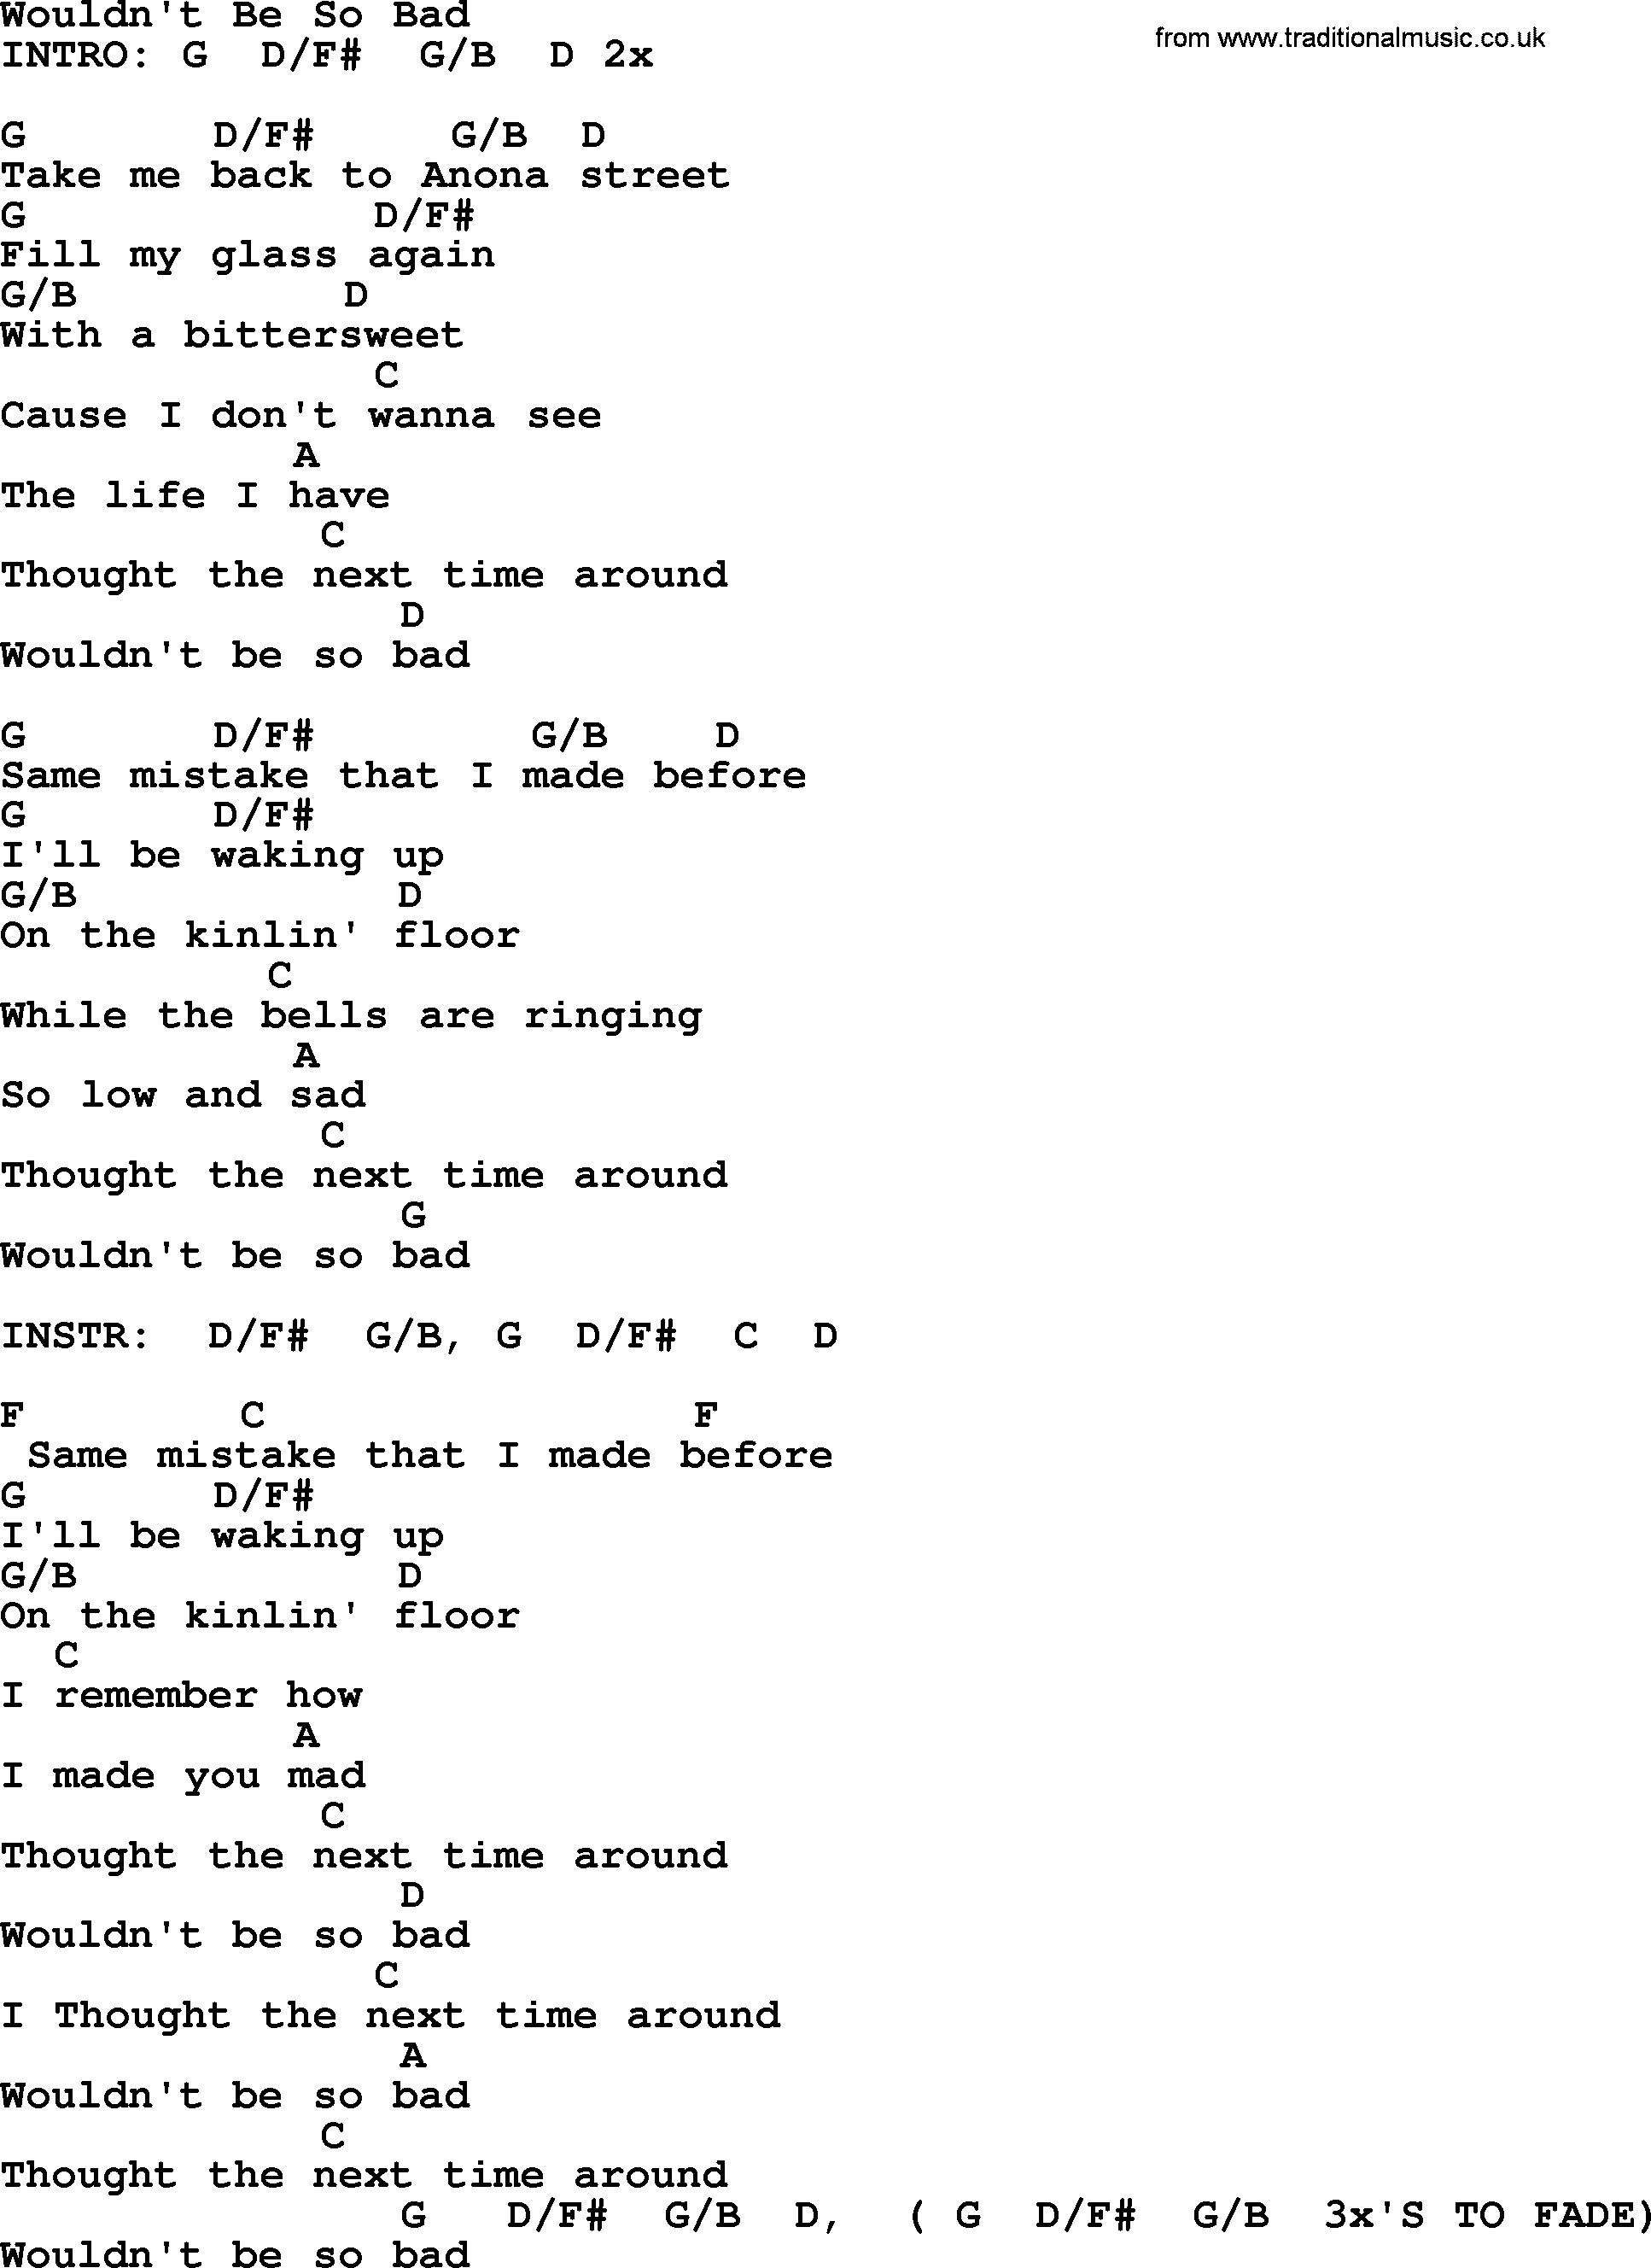 Bluegrass song: Wouldn't Be So Bad, lyrics and chords